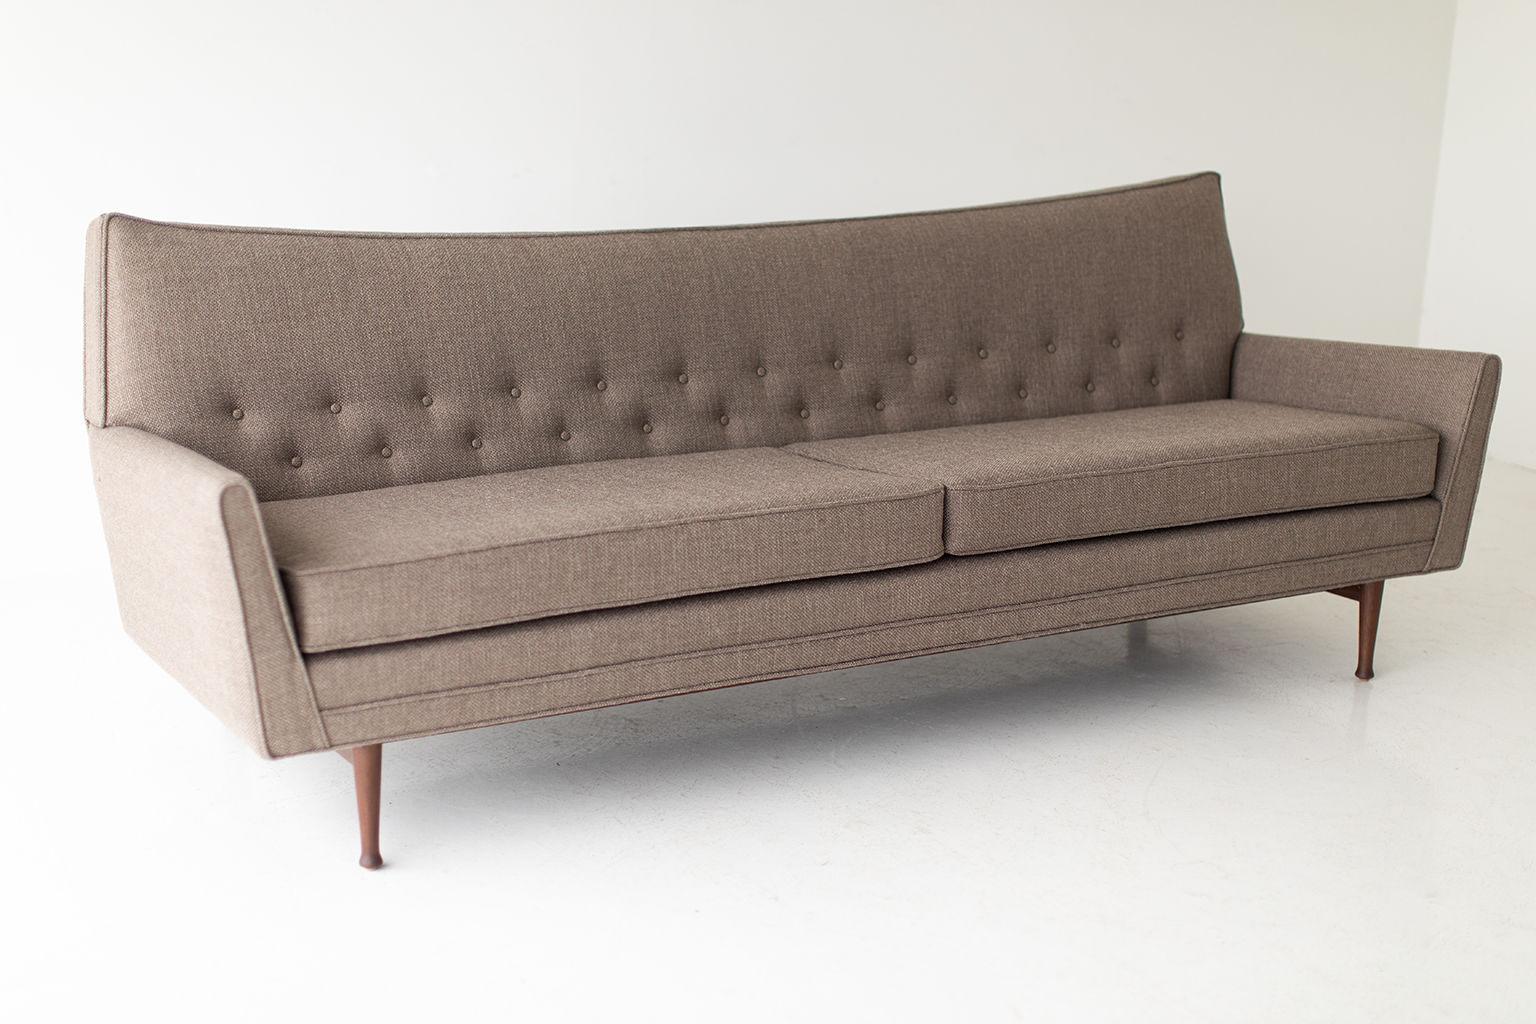 Contemporary Lawrence Peabody Modern Sofa for Craft Associates Furniture For Sale